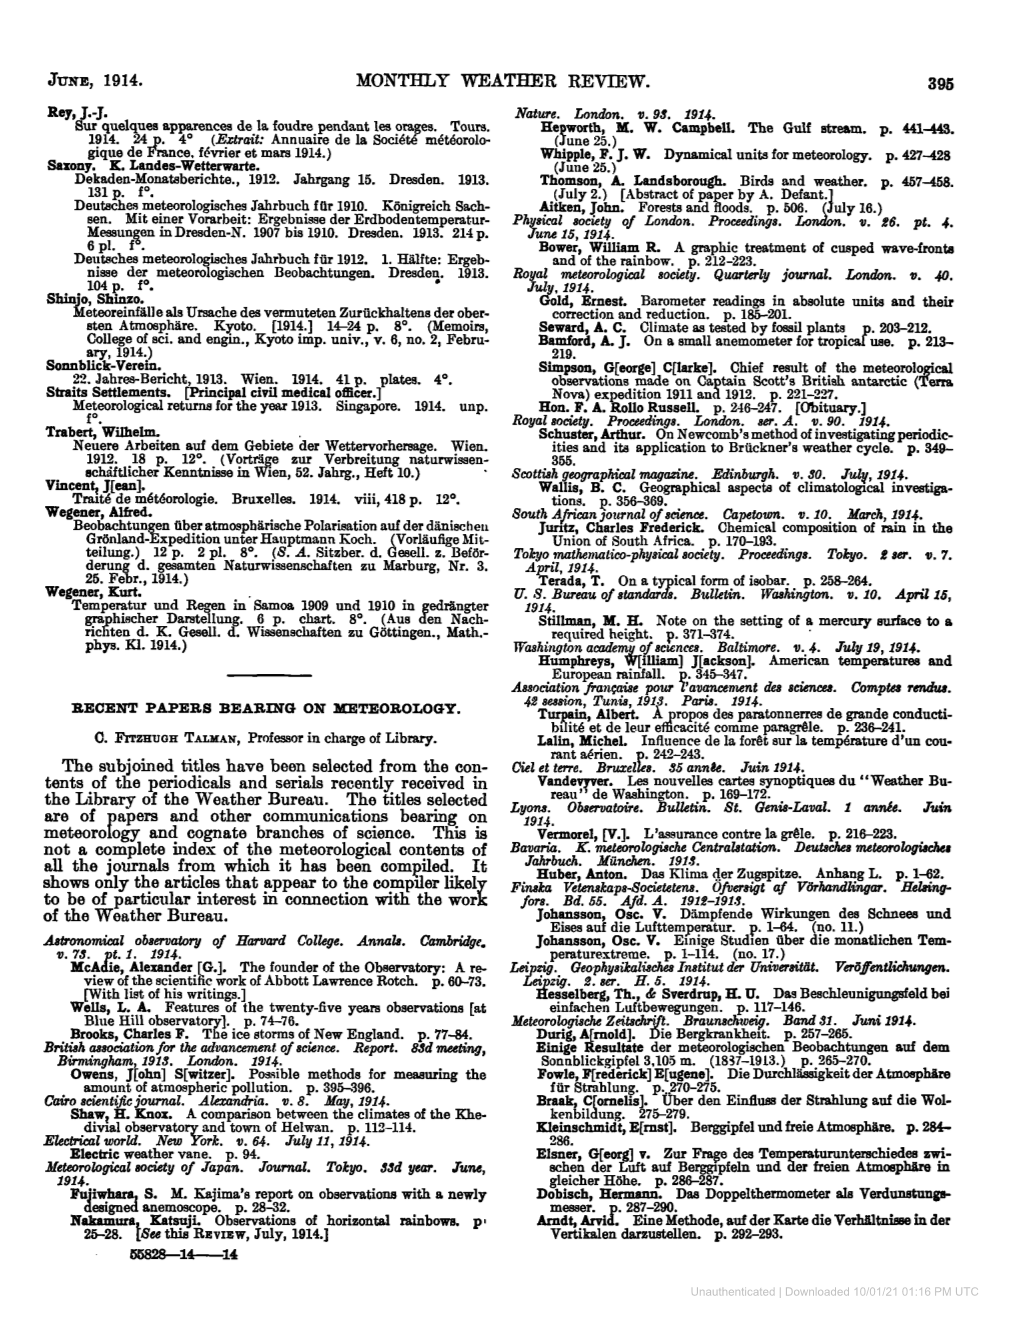 June, 1914. Monthly Weather Review. J